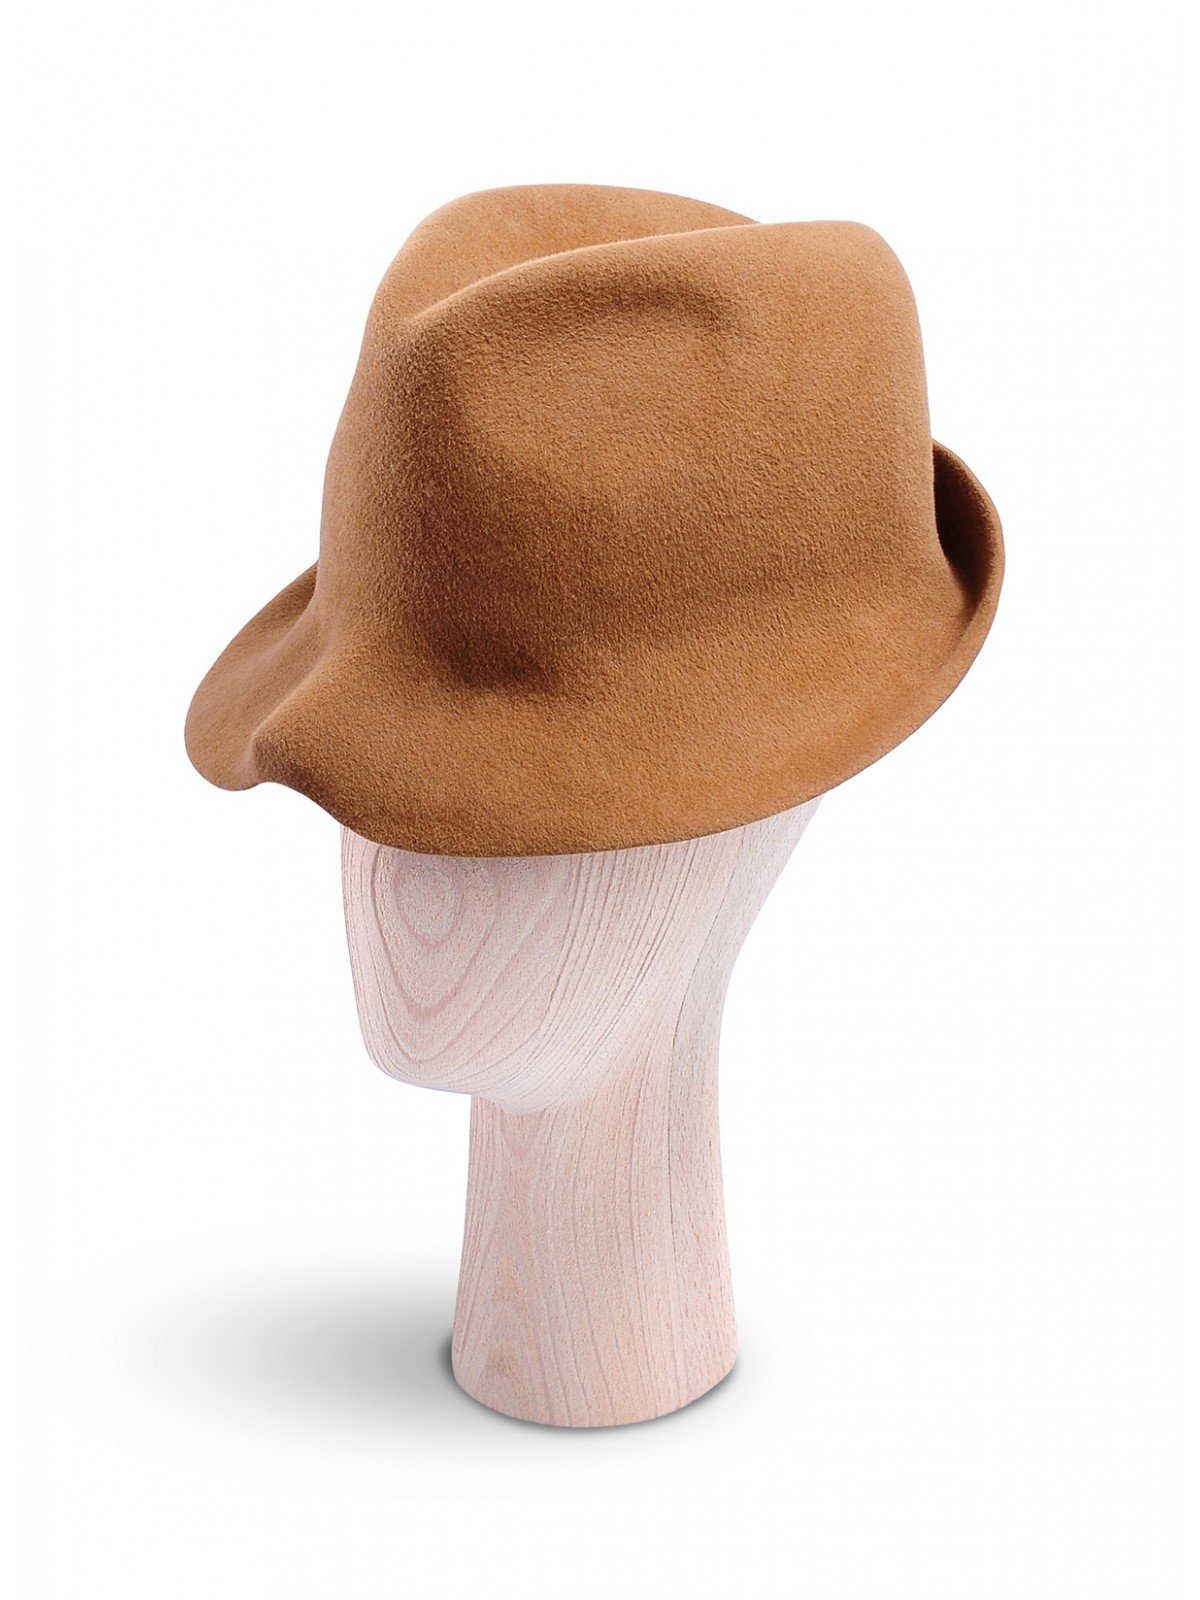 Gold Invisibleman Hat